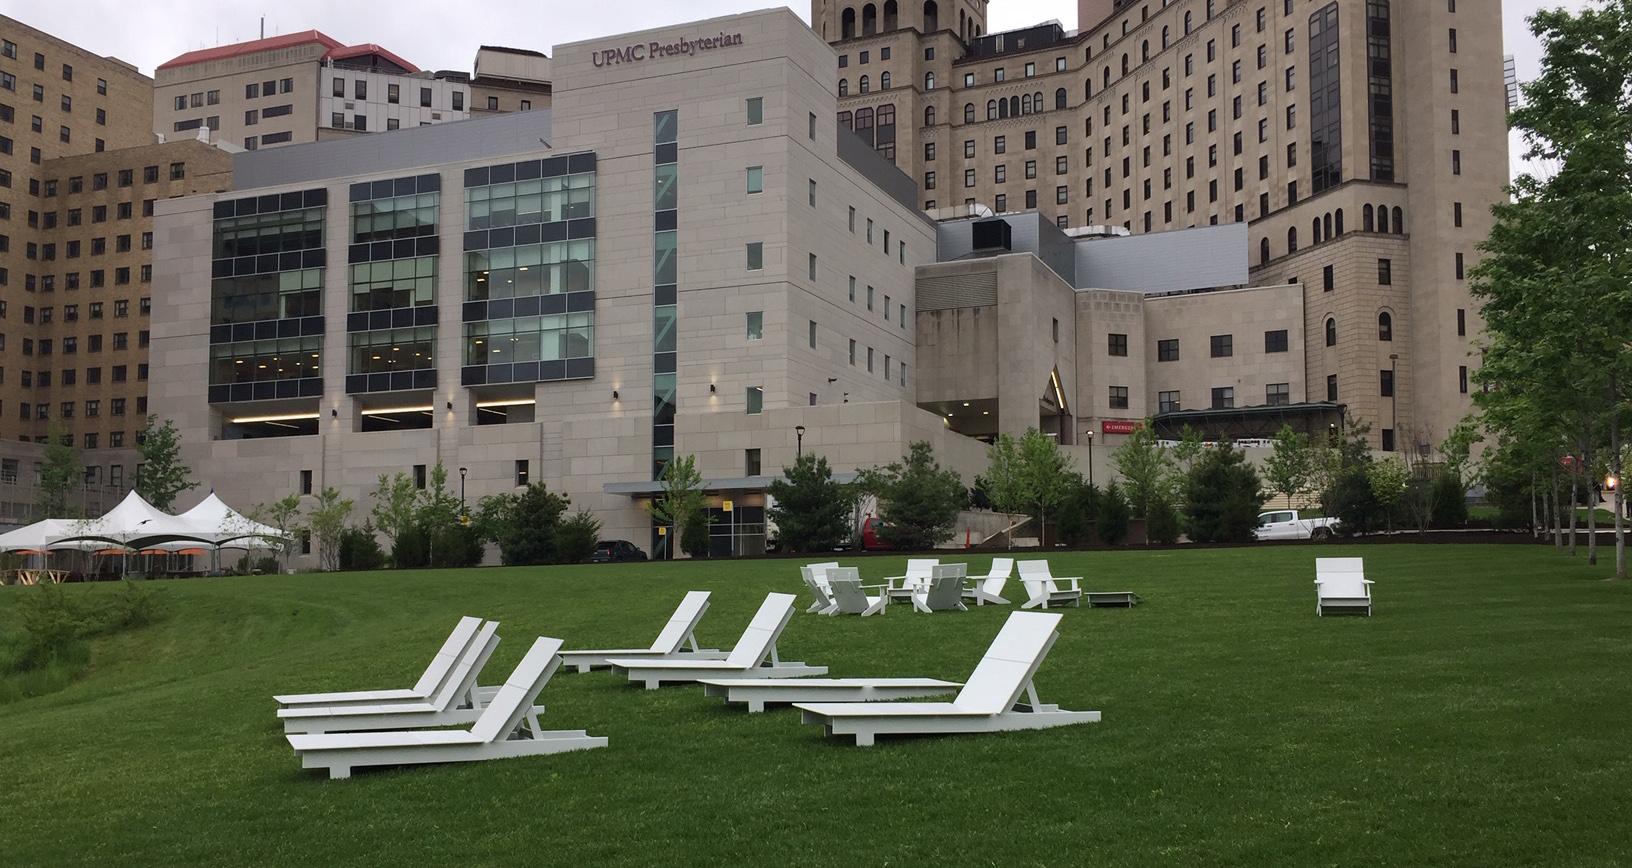 Chairs outside UPMC Presby